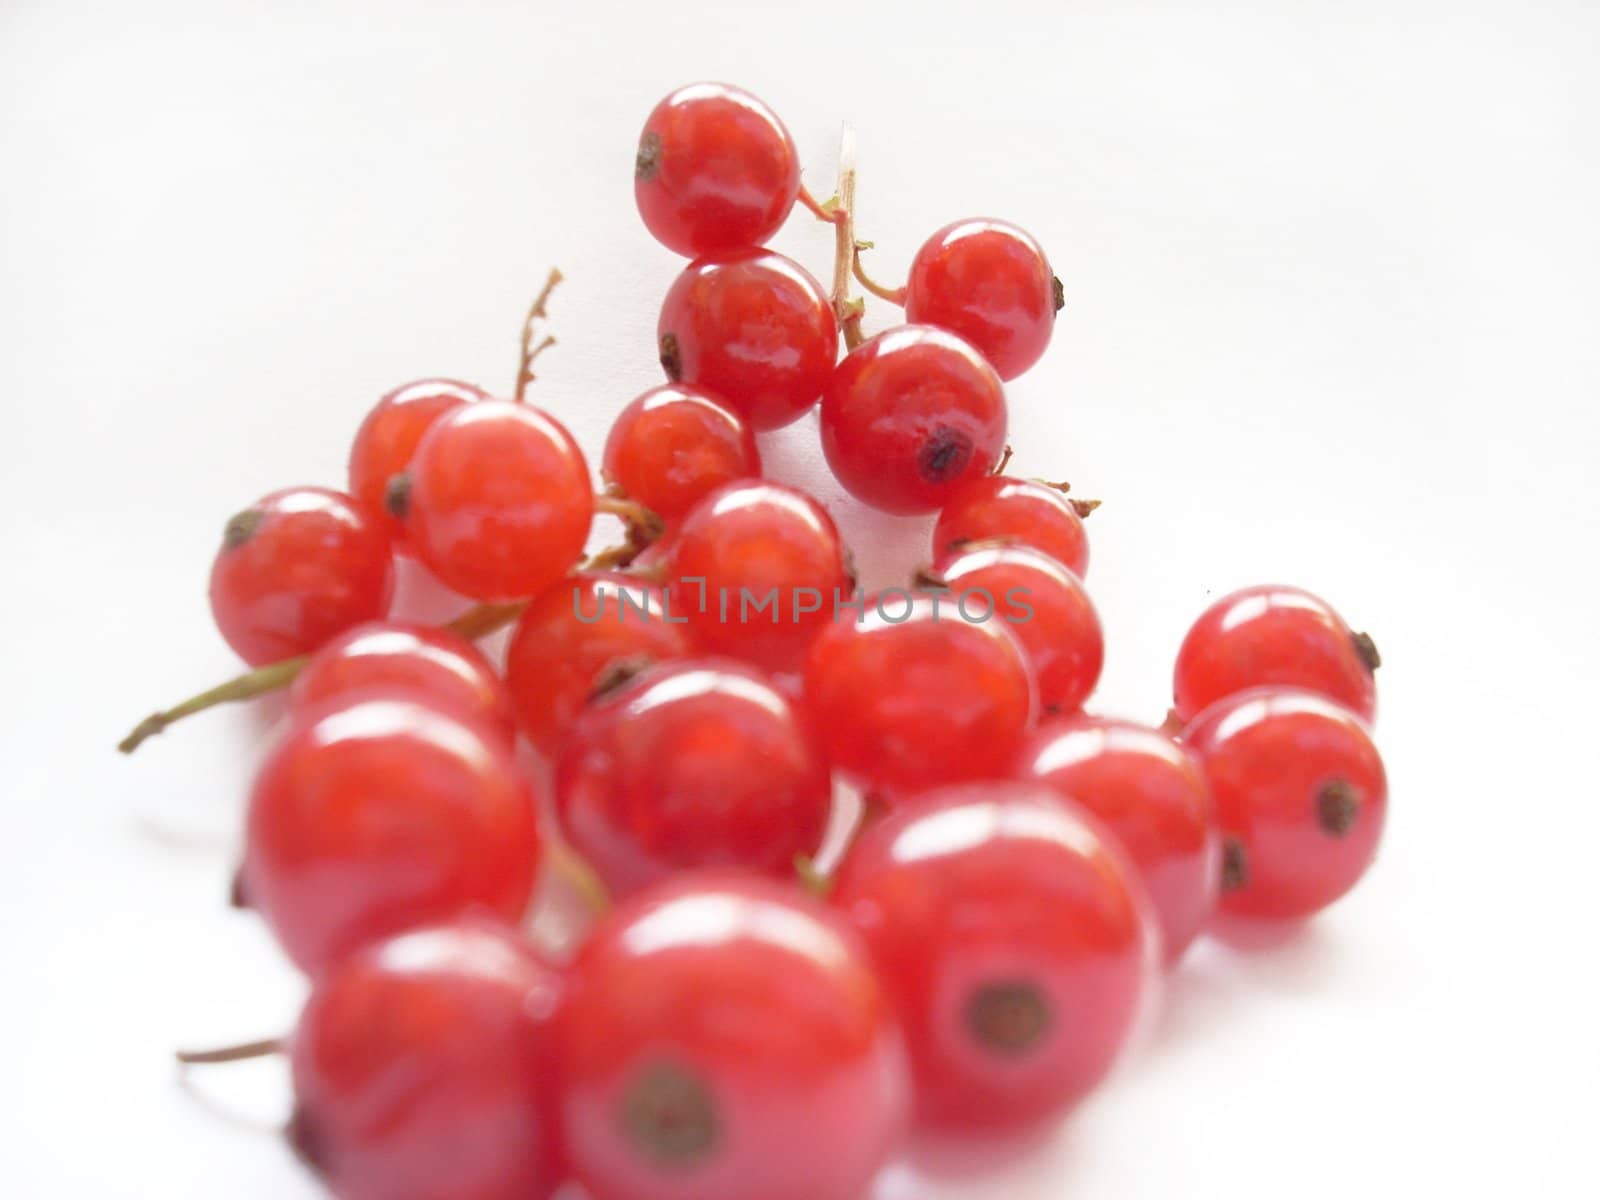 Red currant berries by DOODNICK